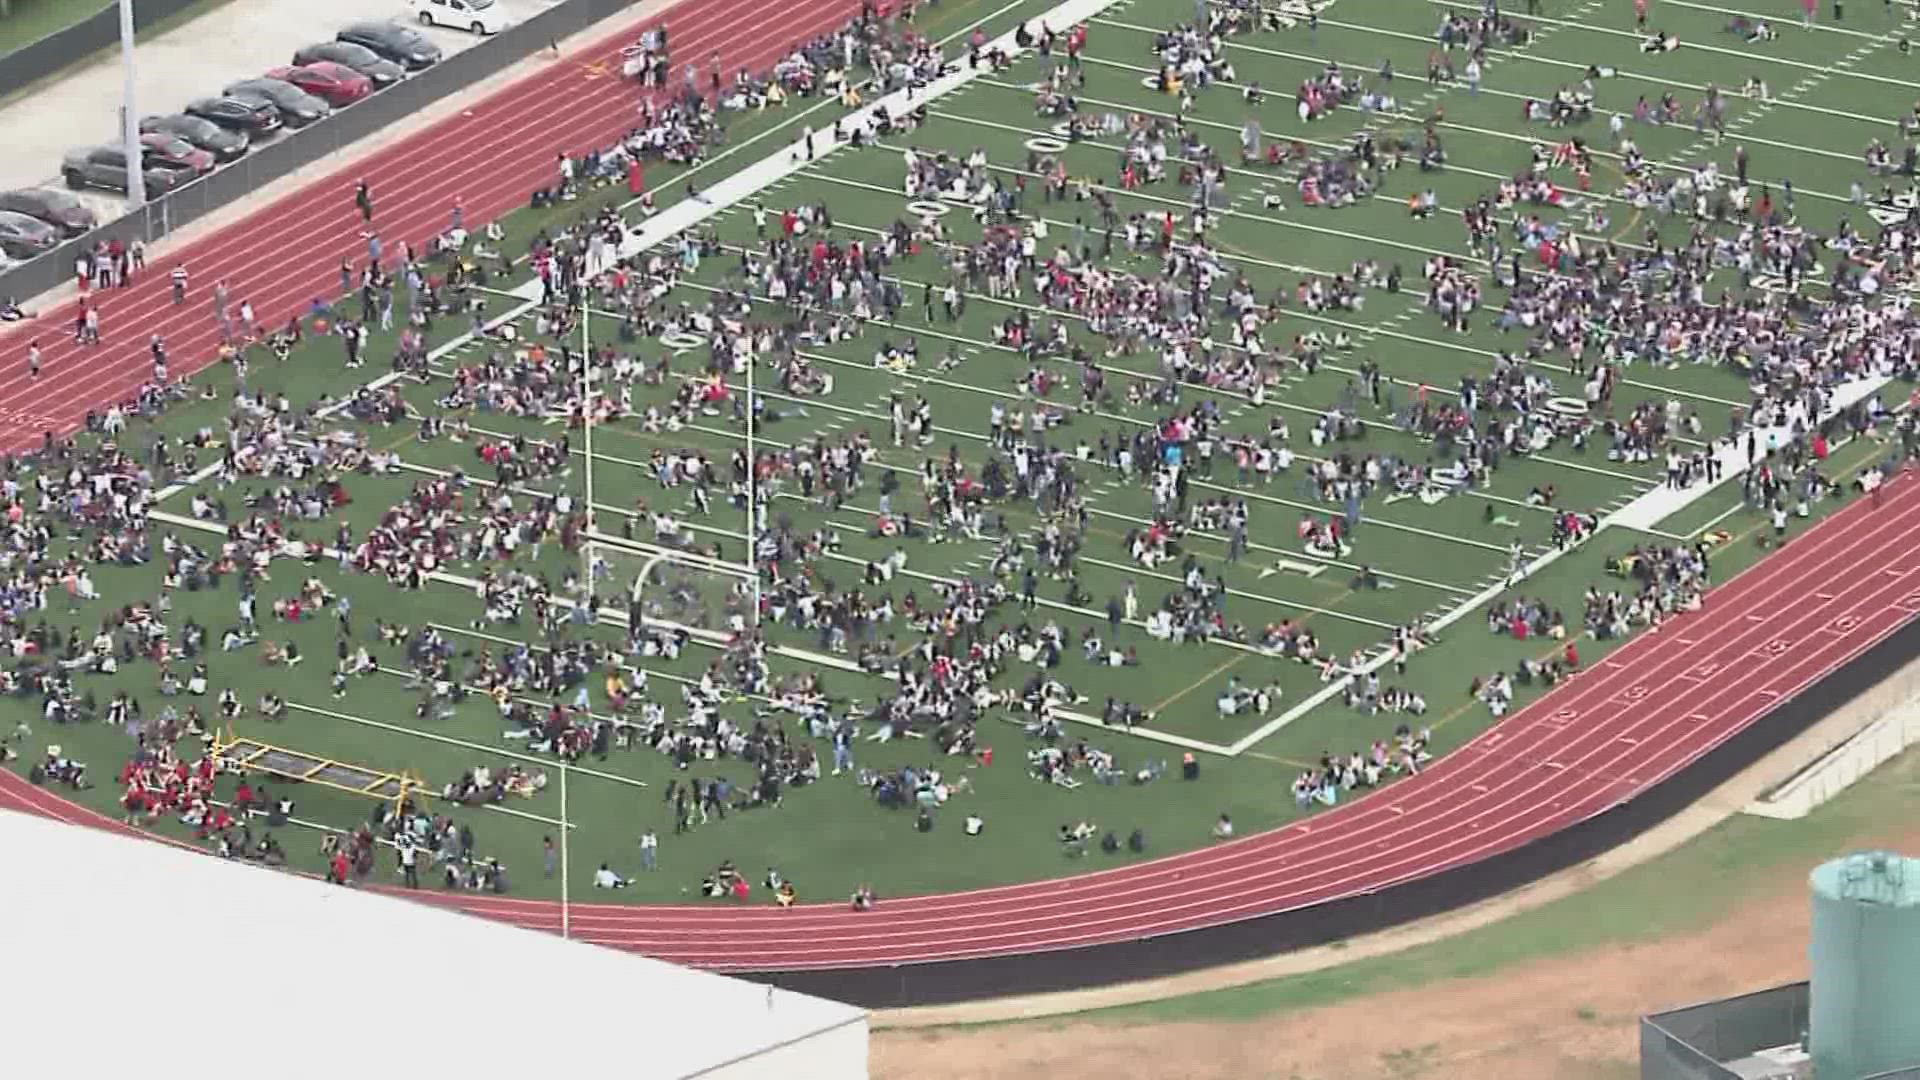 threat-made-against-euless-trinity-high-school-wfaa